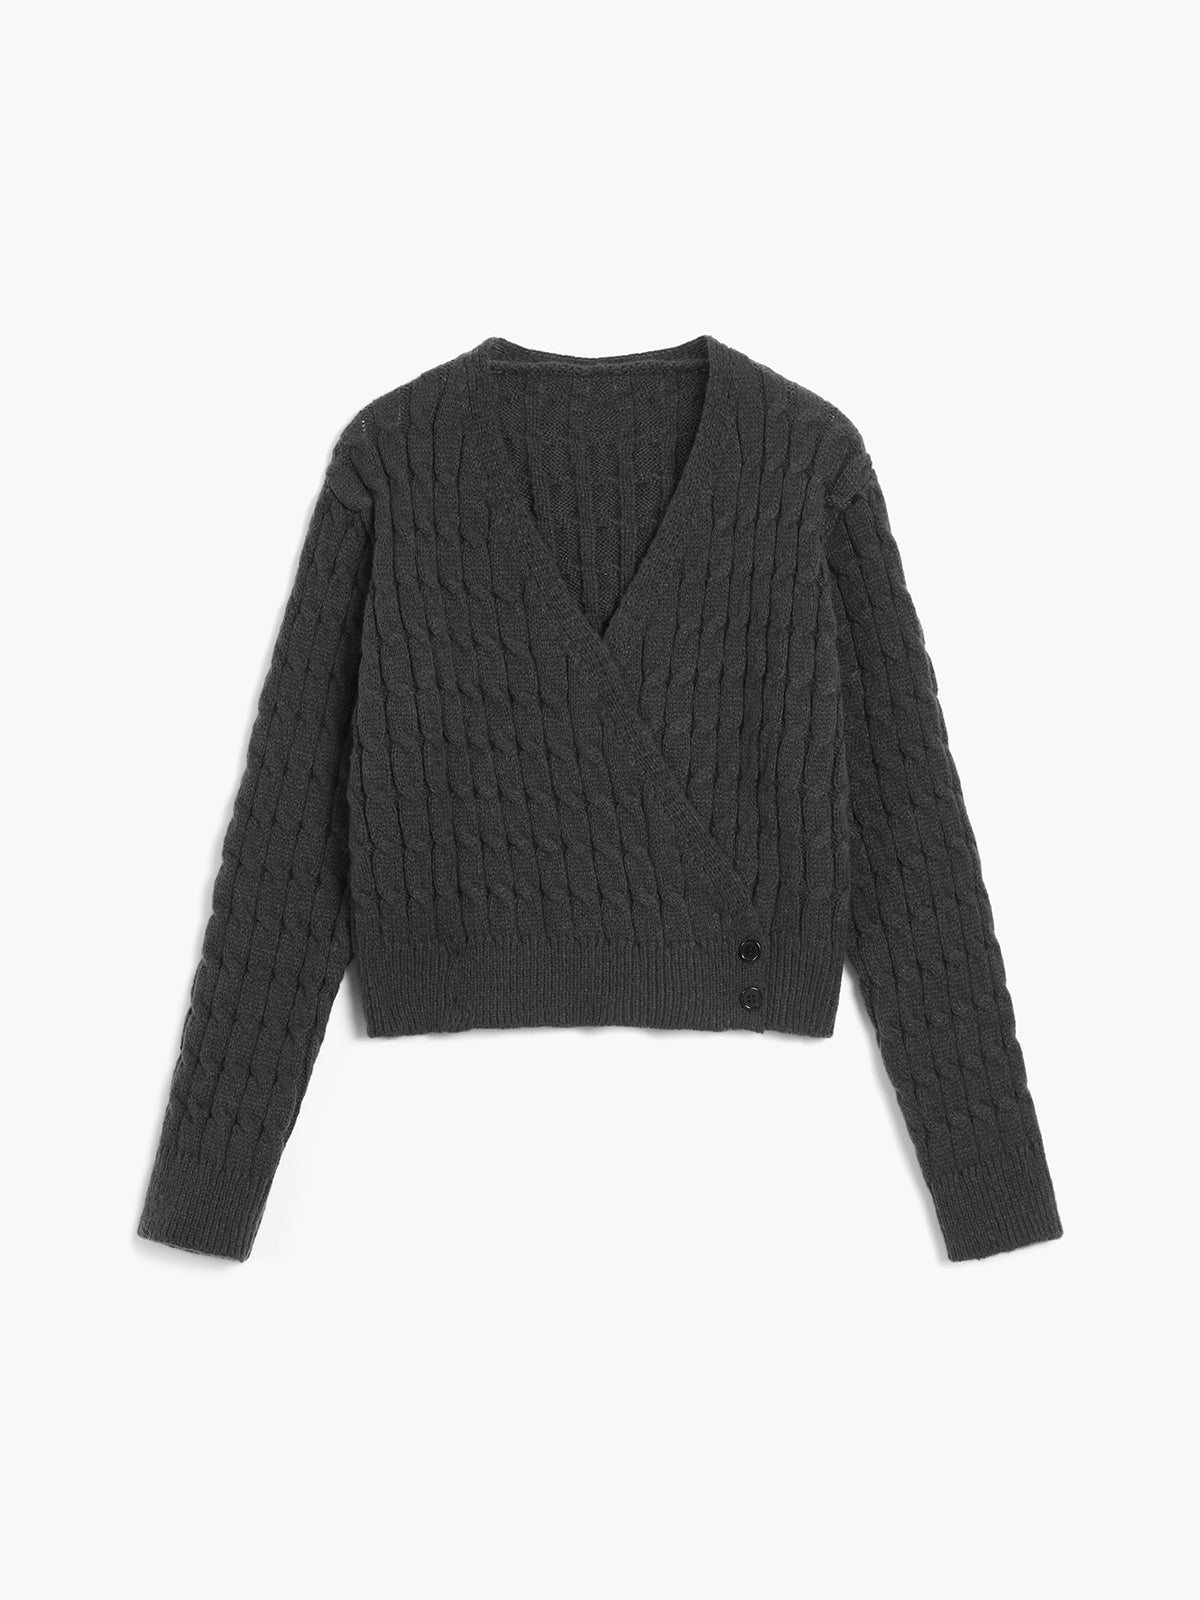 Asymmertic Buttoned Cable Knit Crop Sweater